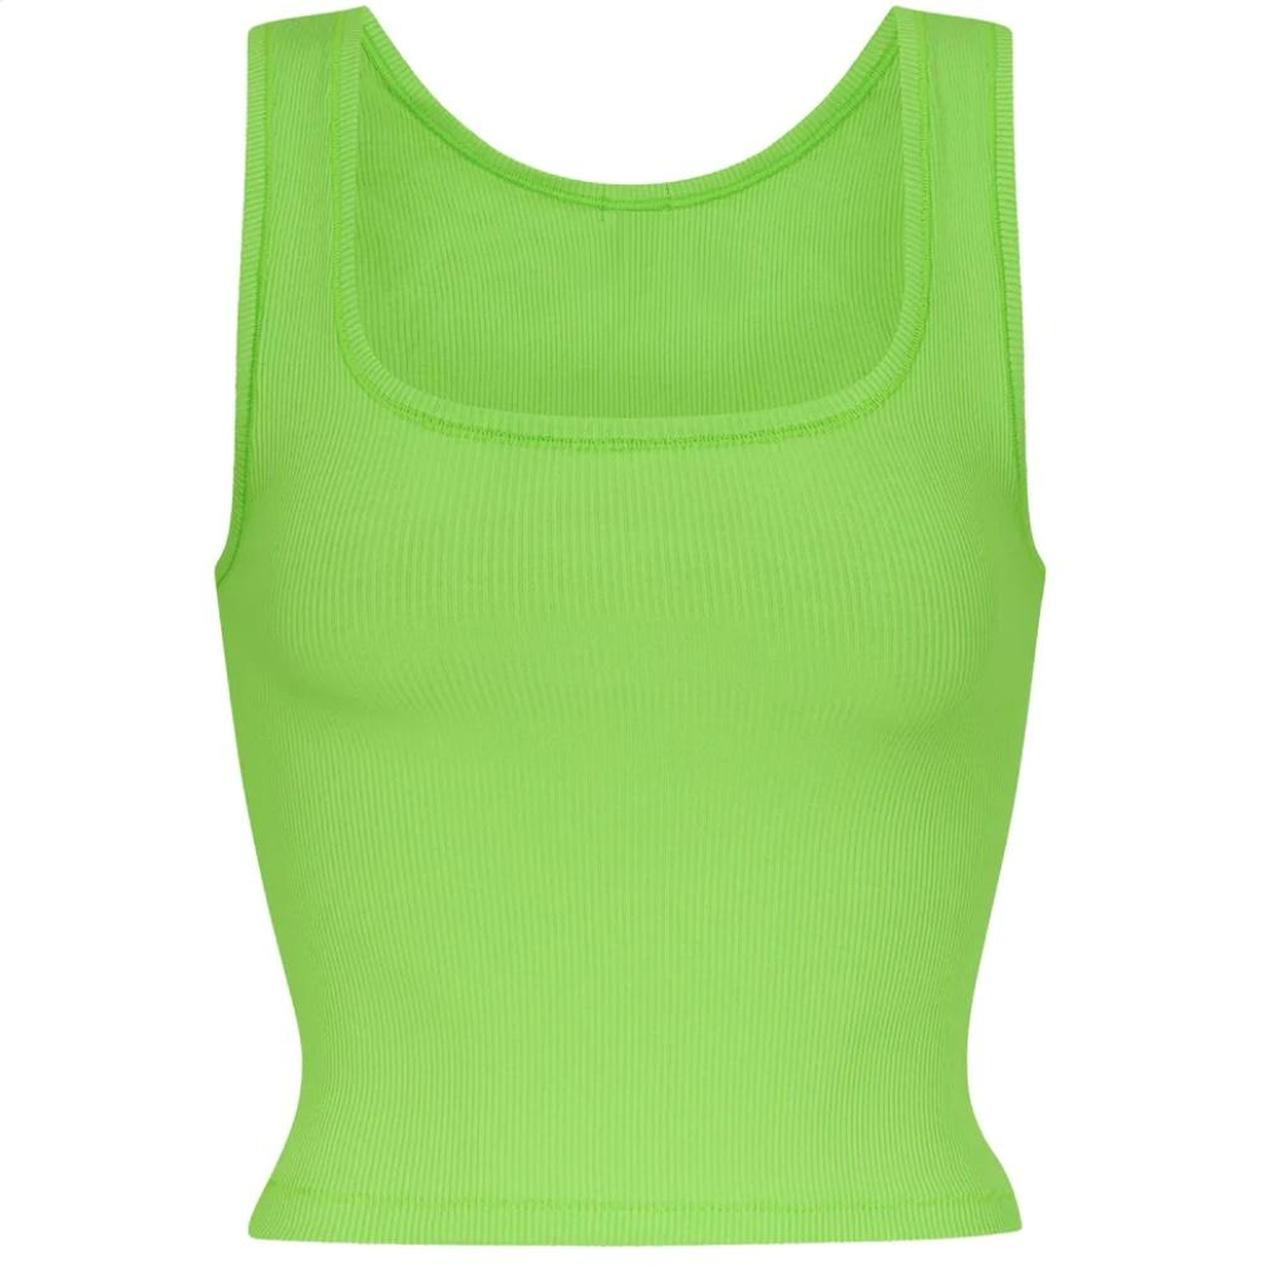 SKIMS all day, every day 💚 loving this new neon green cotton rib one